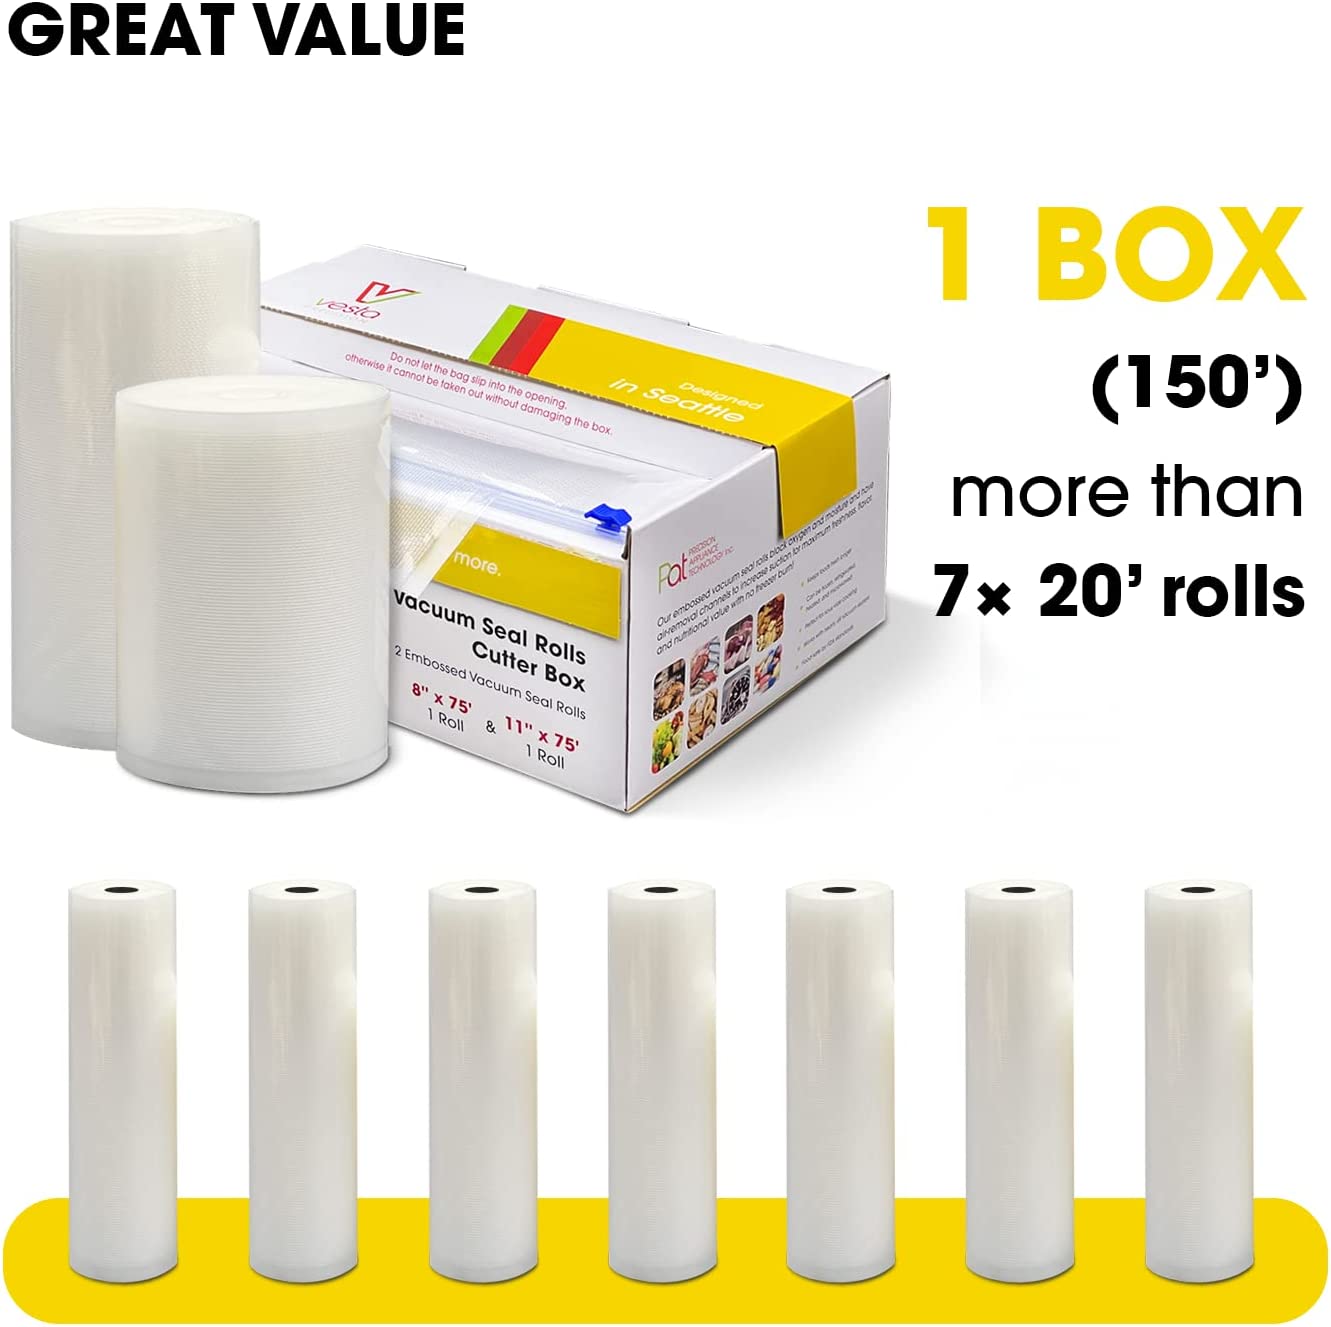 11x100' Bulk Vacuum Seal Rolls with Box and Built in Bag Cutter